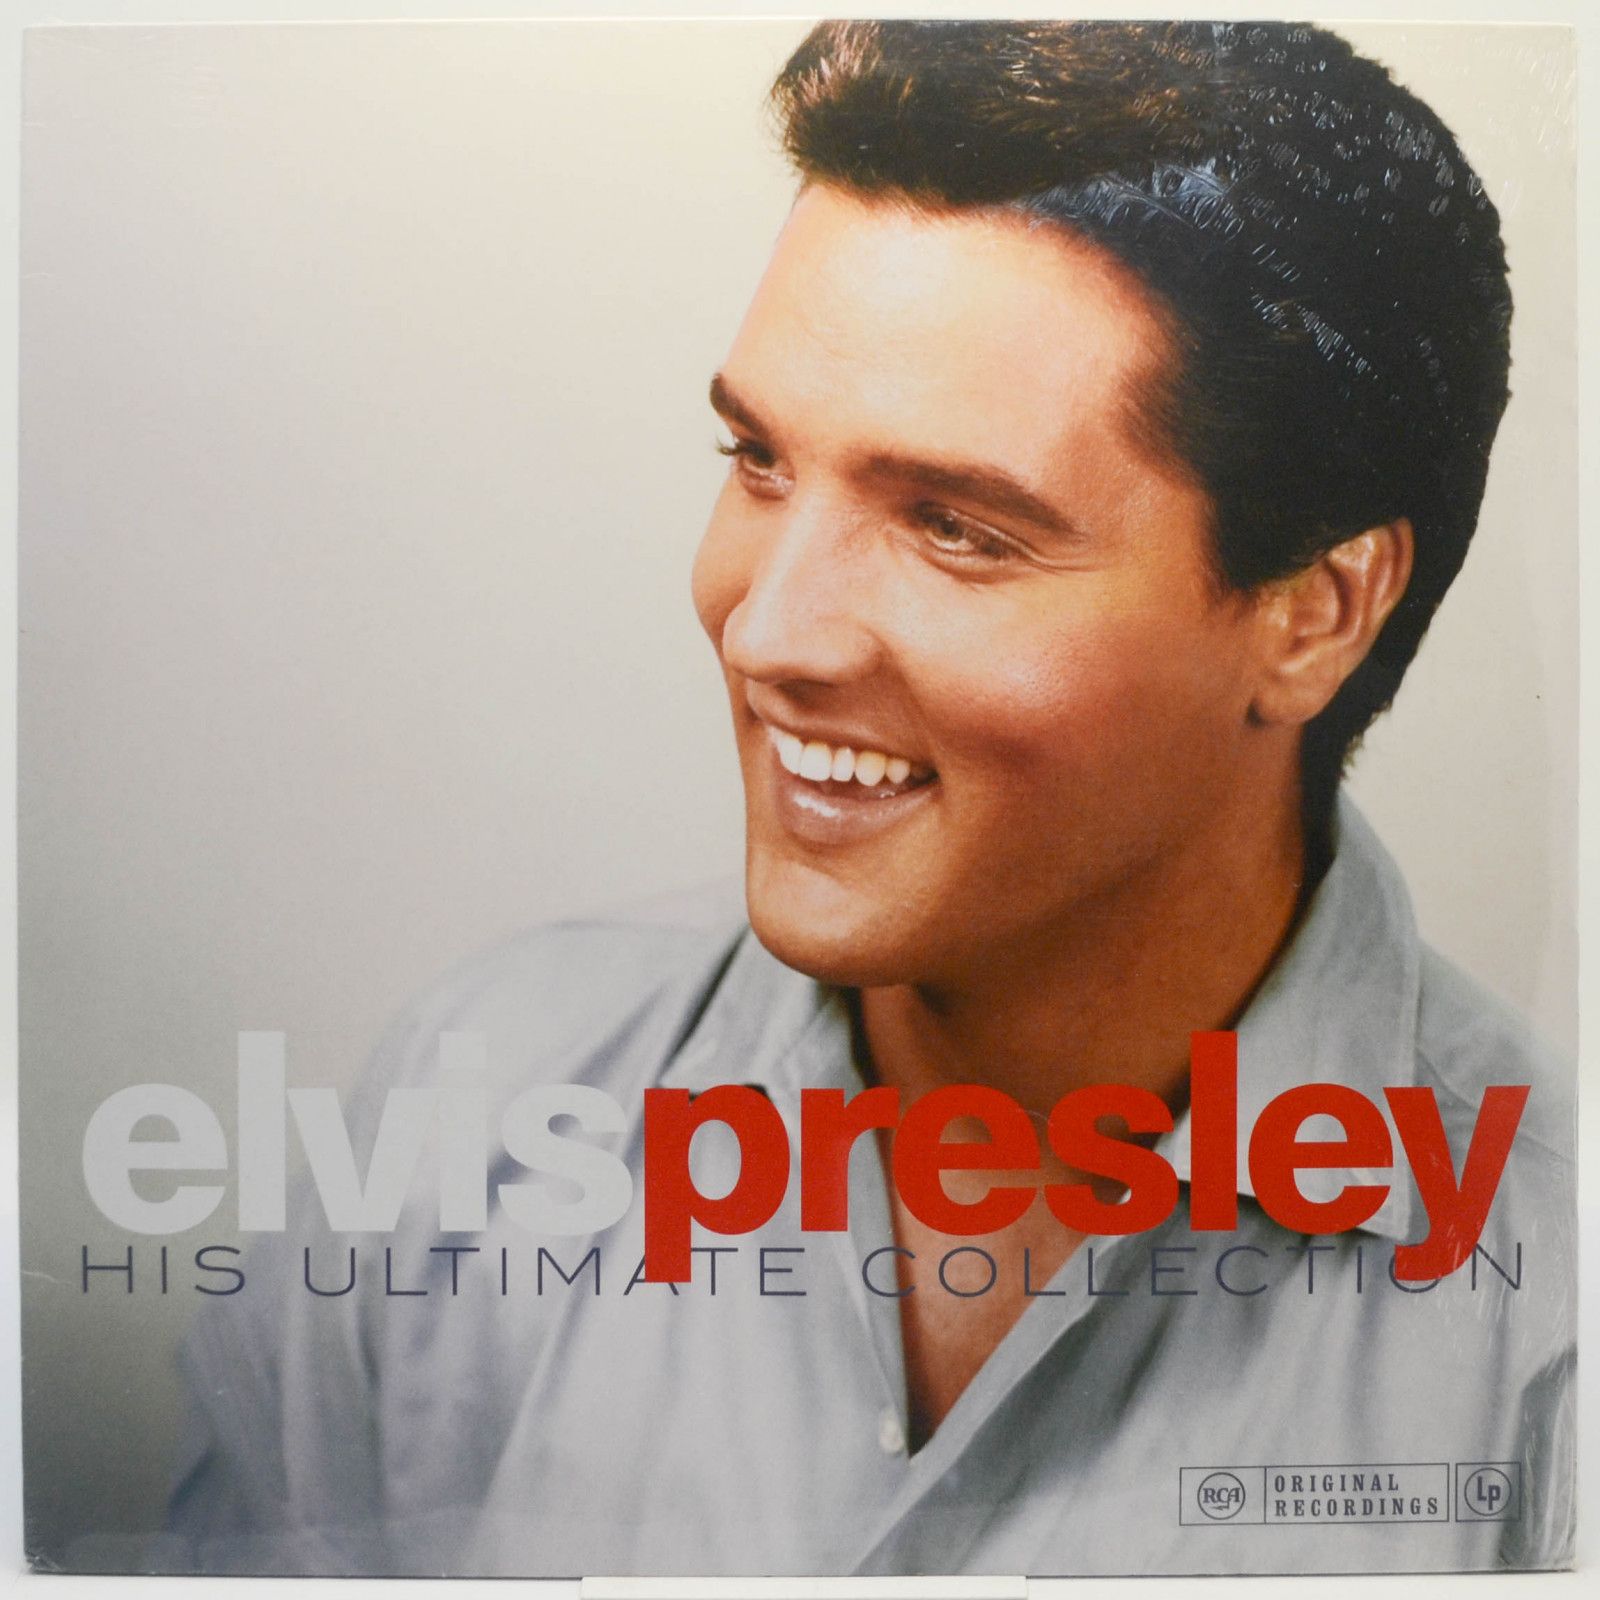 Elvis Presley — His Ultimate Collection, 2018